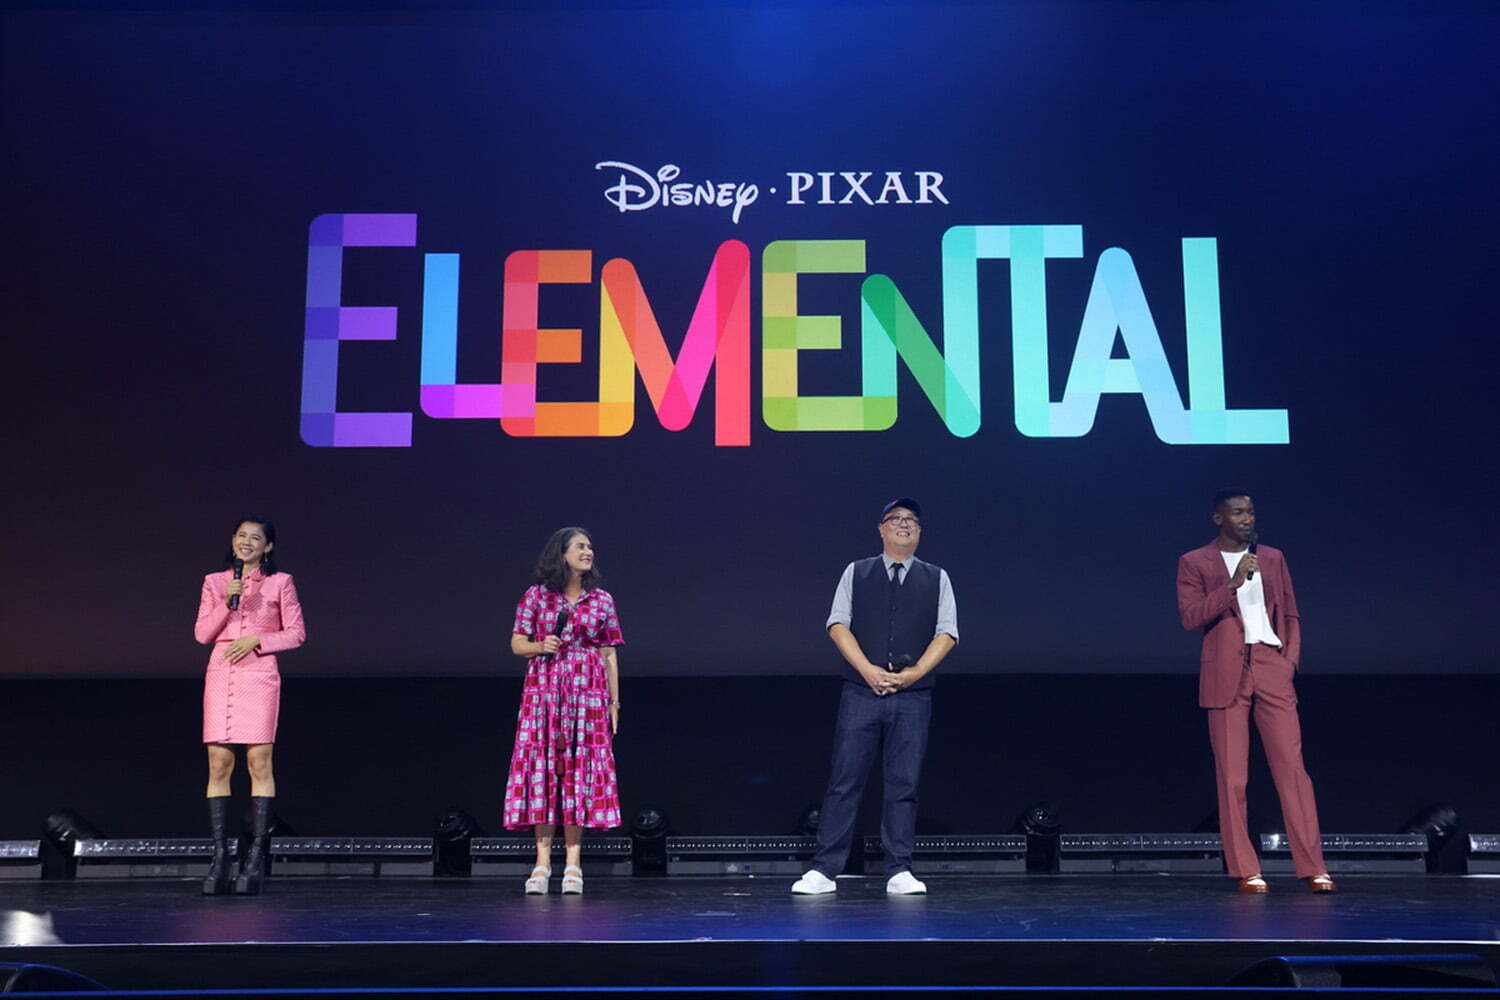 (L-R) Leah Lewis, Denise Ream, Peter Sohn, Vice President, Creative, of Pixar Animation Studios, and Mamoudou Athie speak onstage during D23 Expo 2022 at Anaheim Convention Center in Anaheim, California on September 09, 2022. (